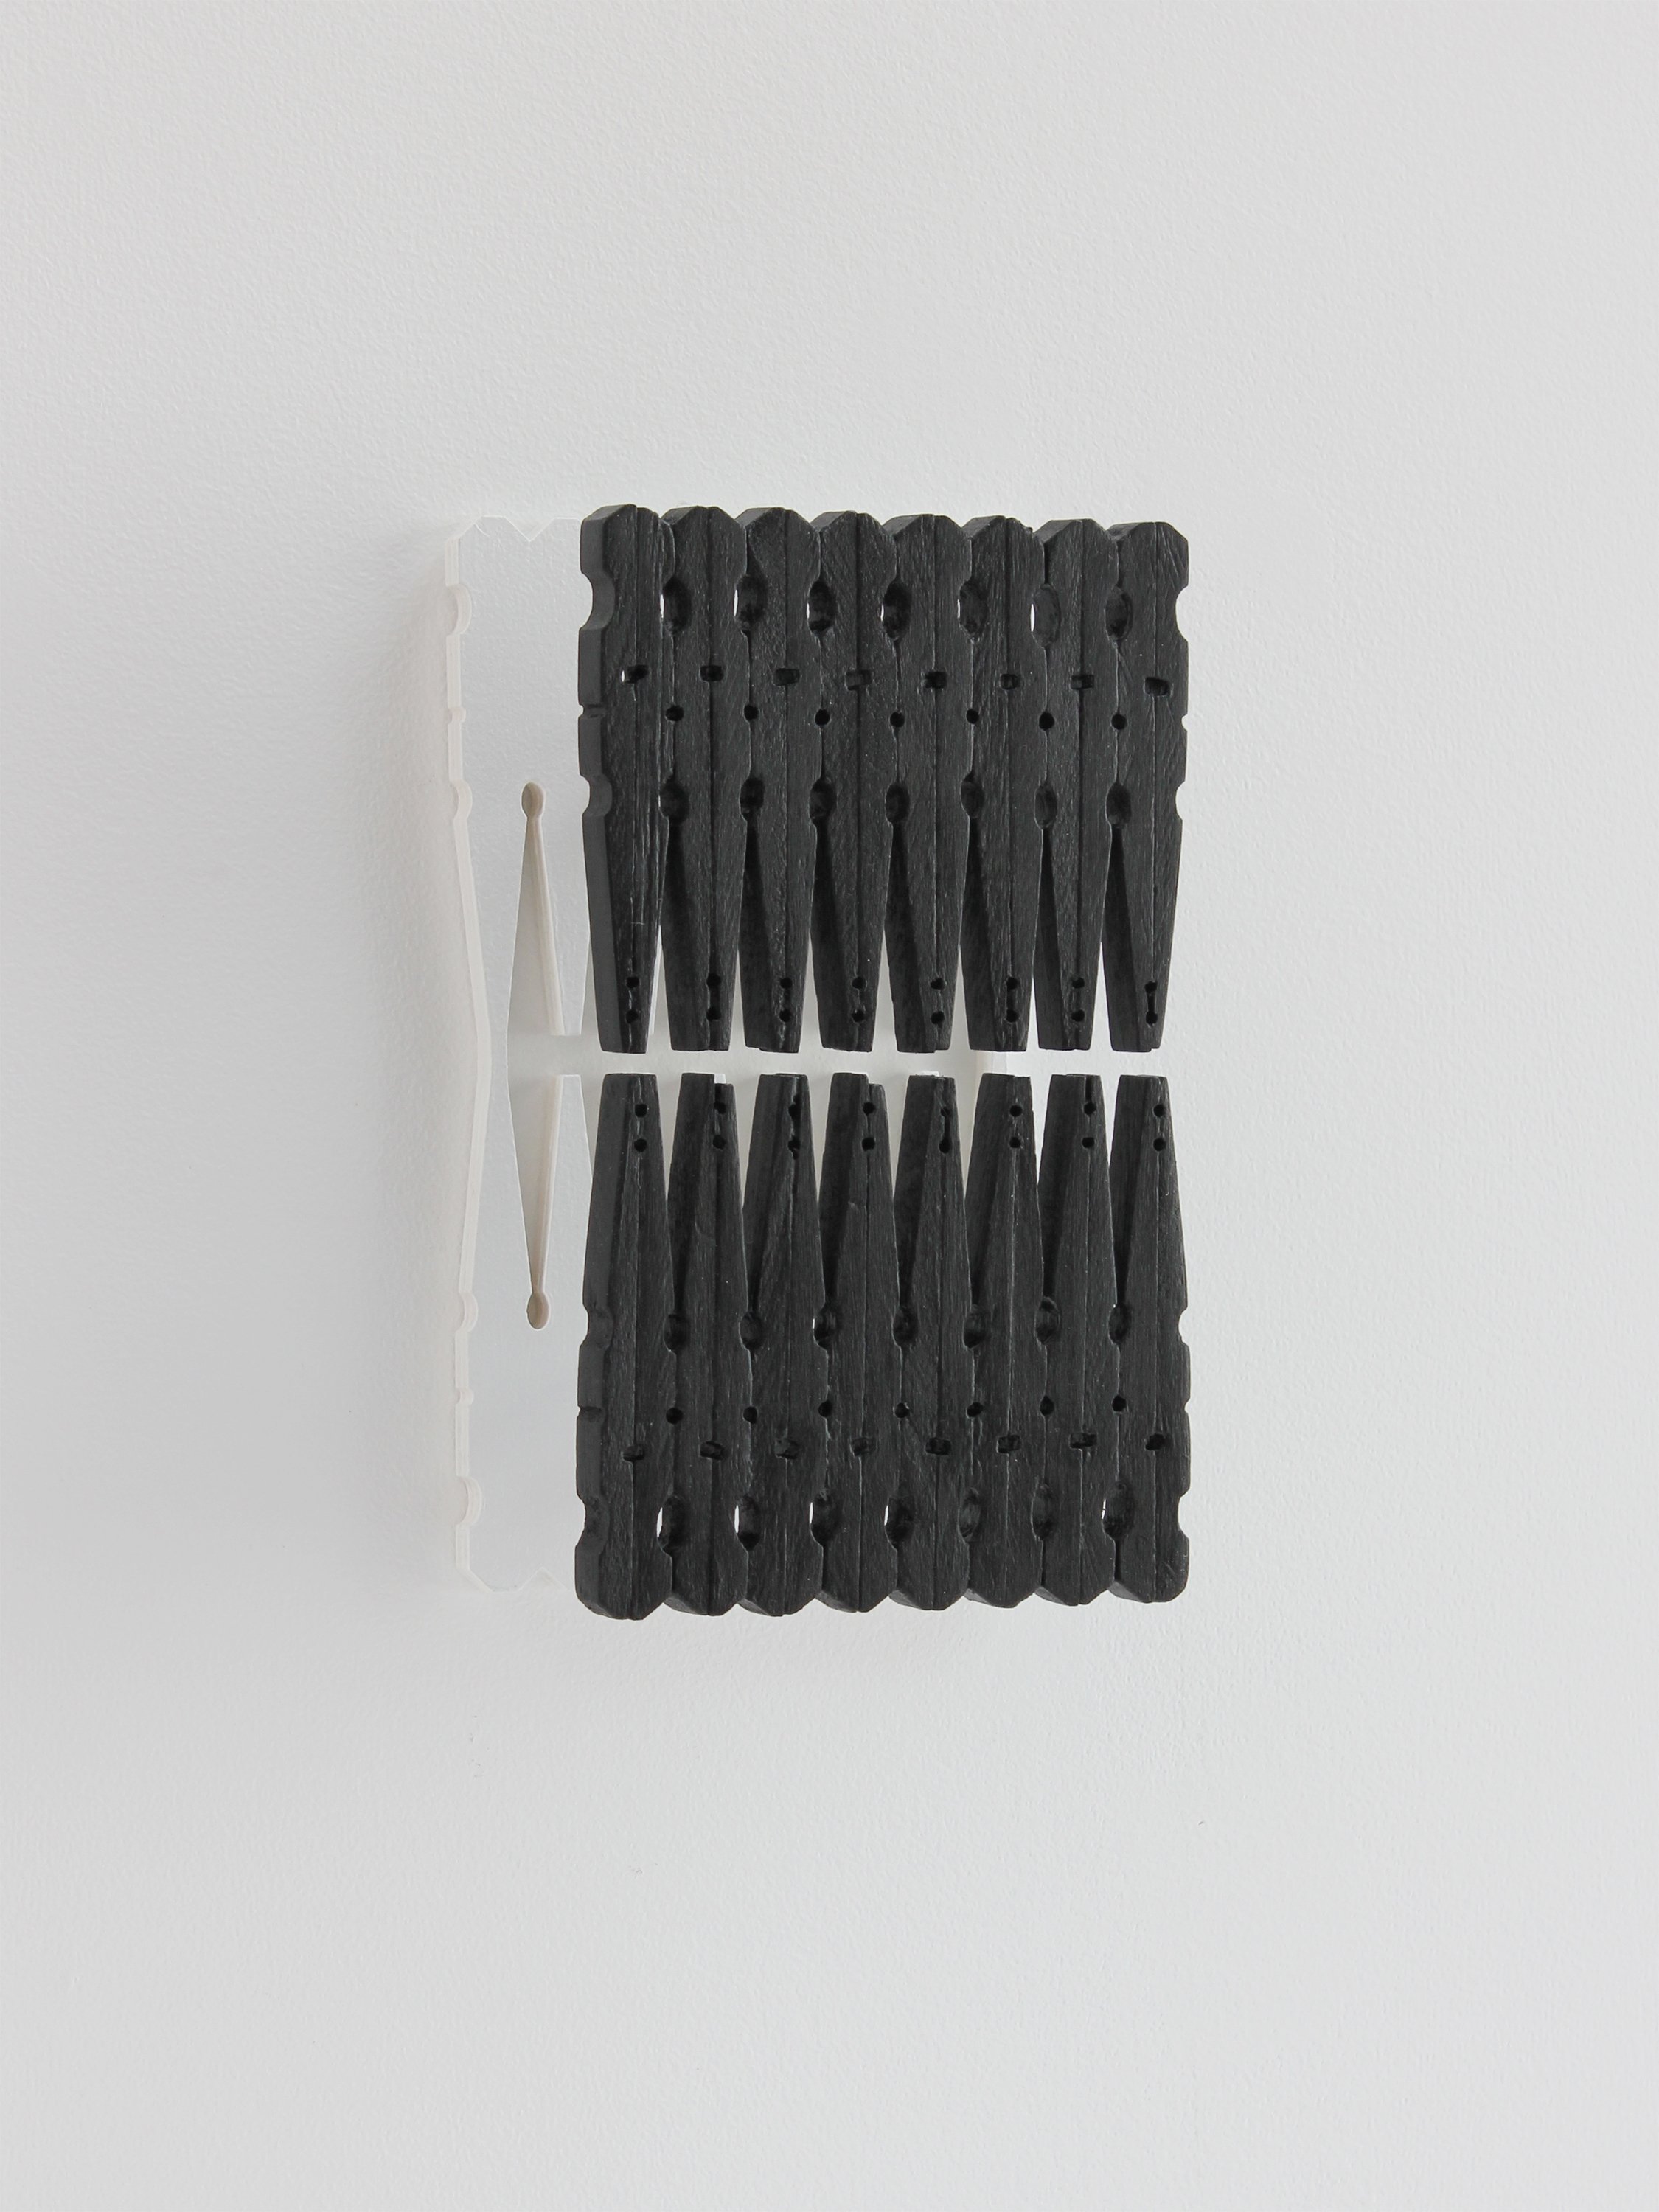   Ornamental Comb  Clothespins, wood, acrylic, adhesive 7” x 4” x 2” / 2015 Private Collection 